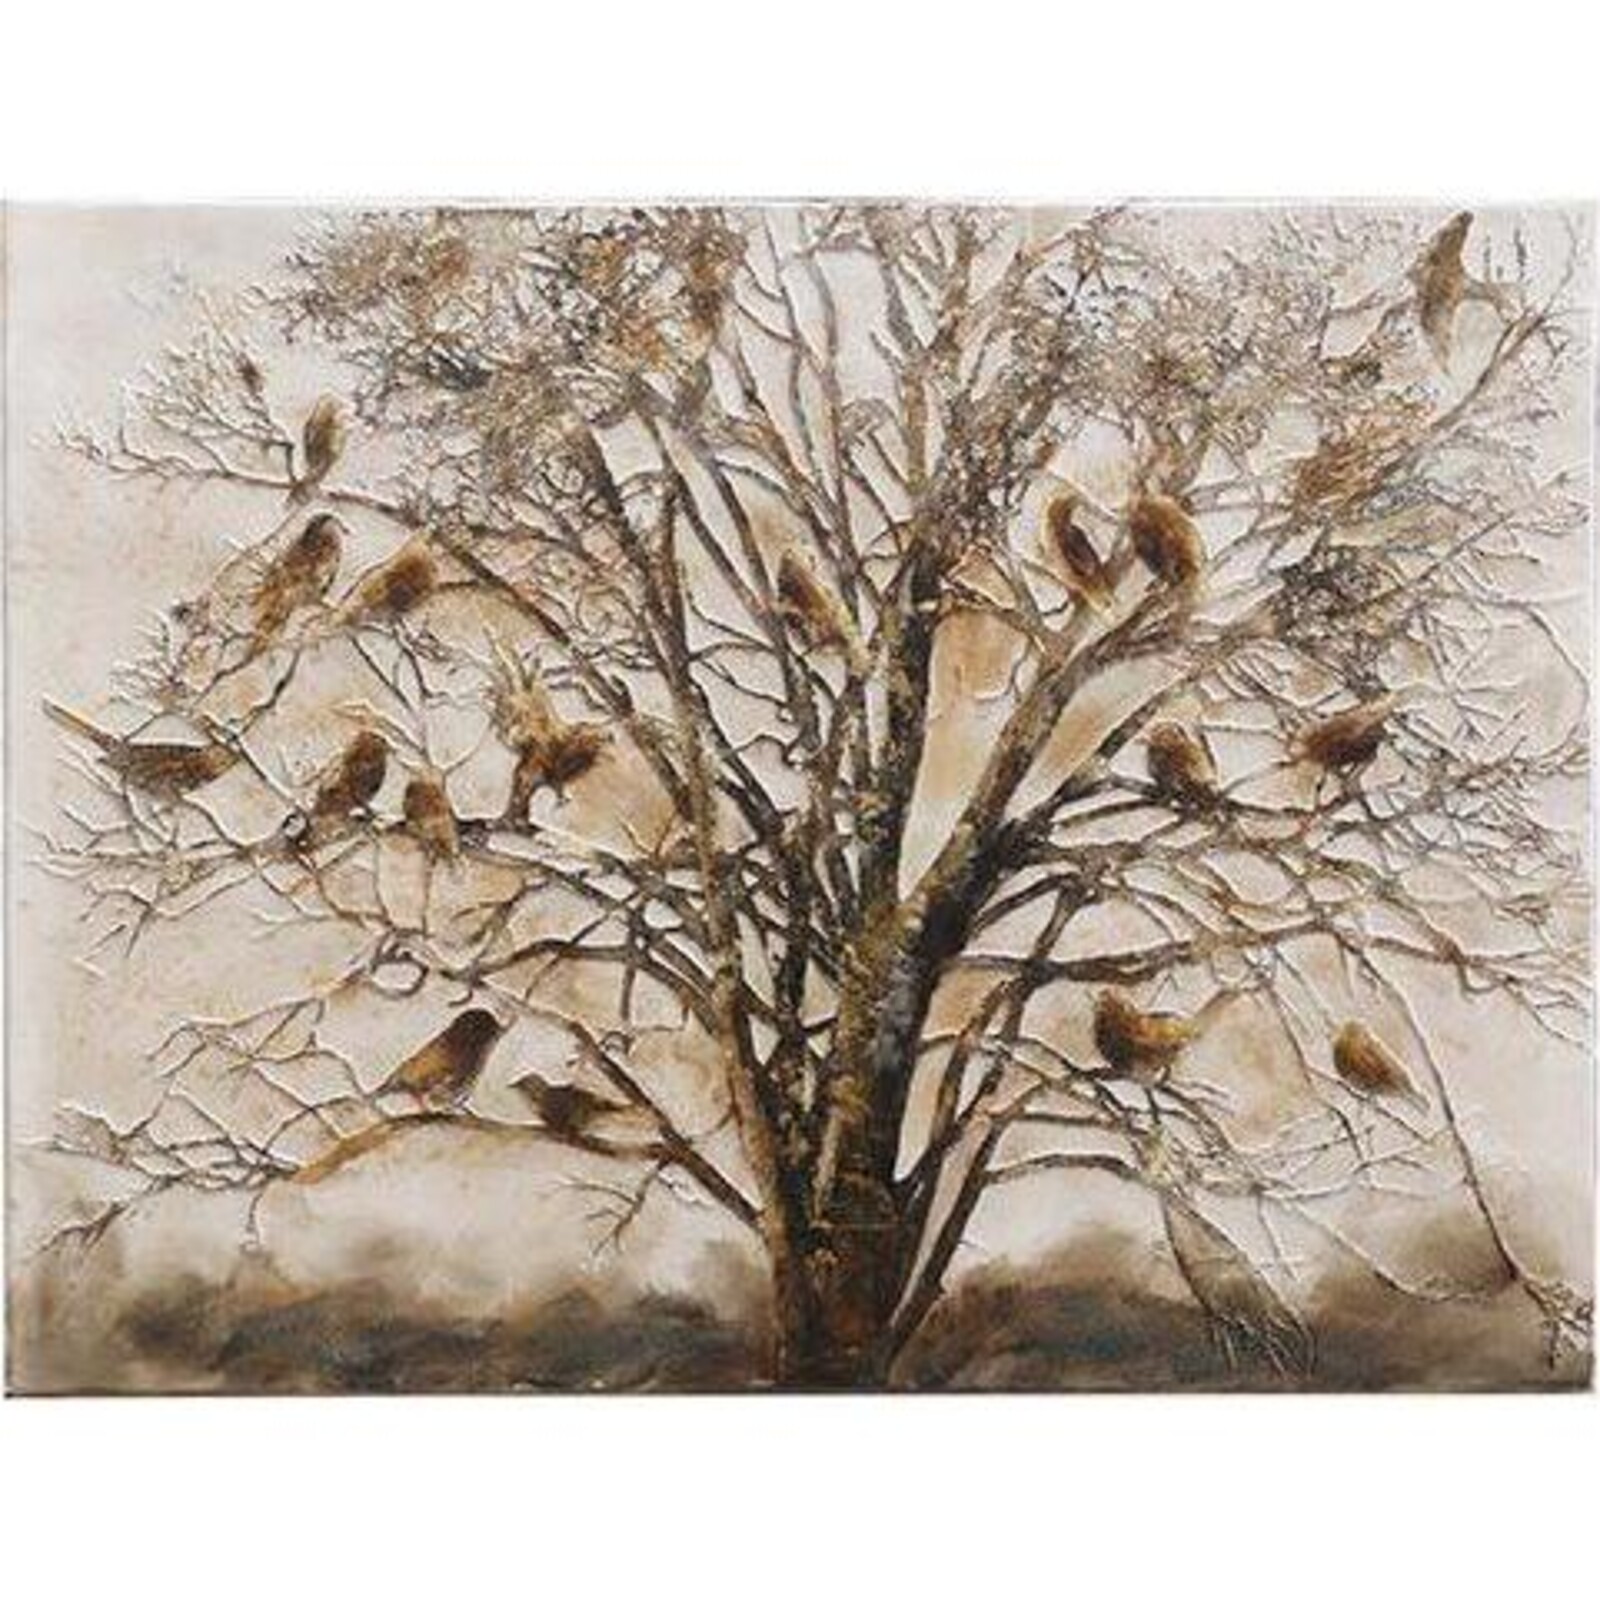 Oil Painting The Nesting Tree